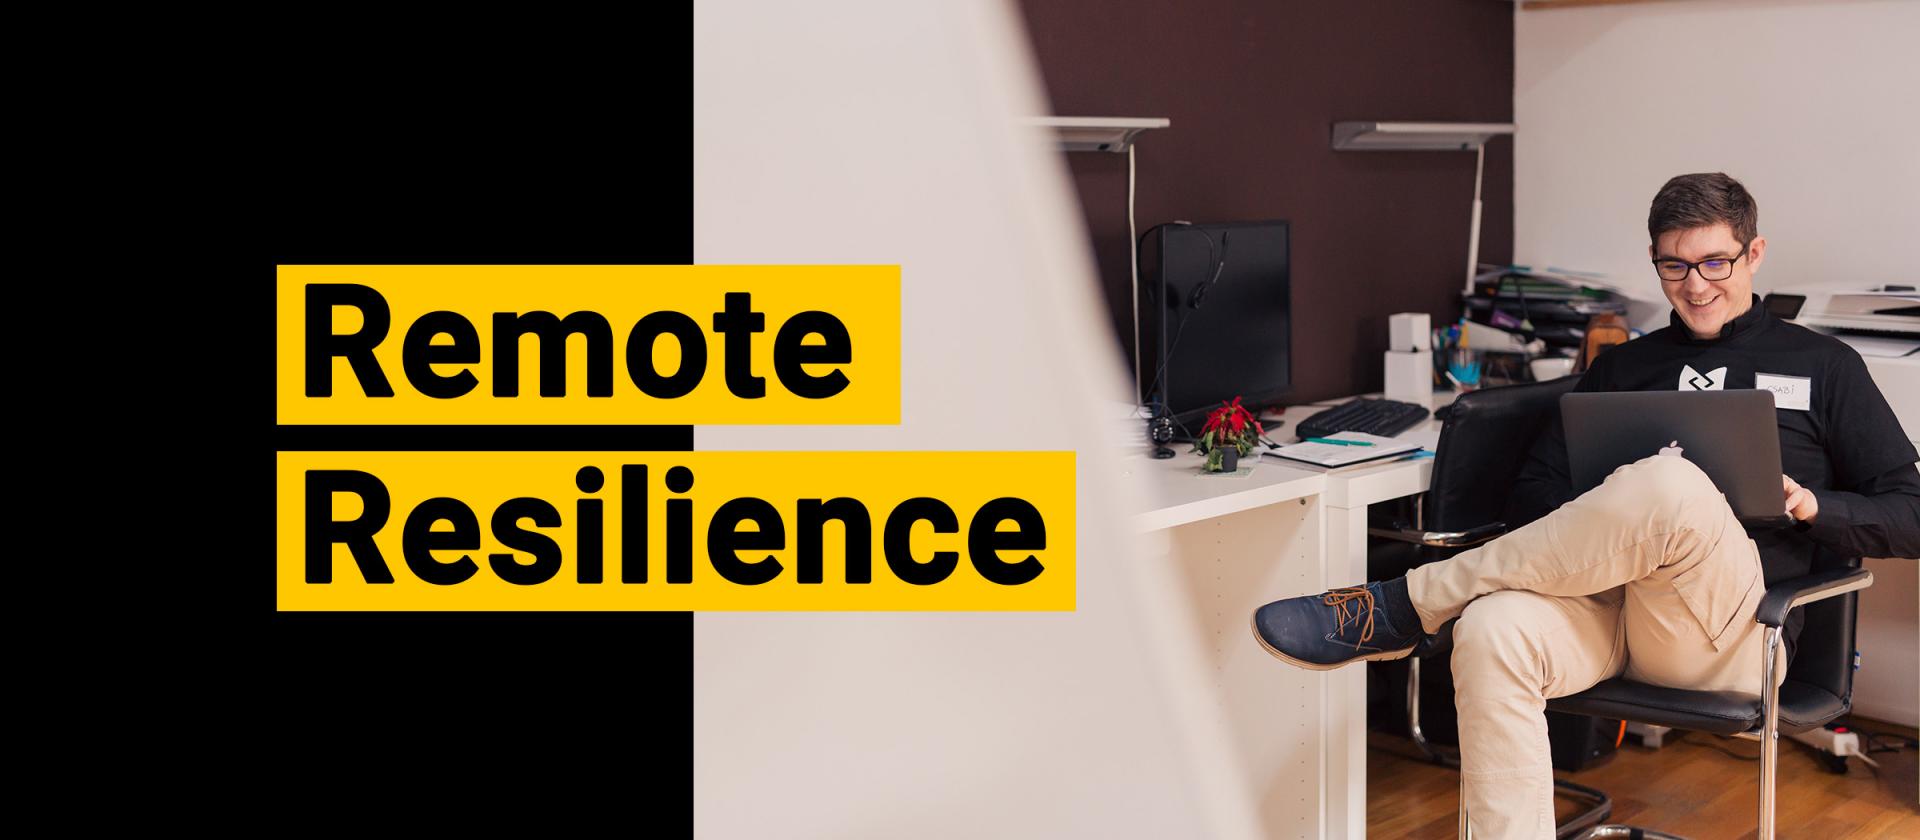 Remote Resilience